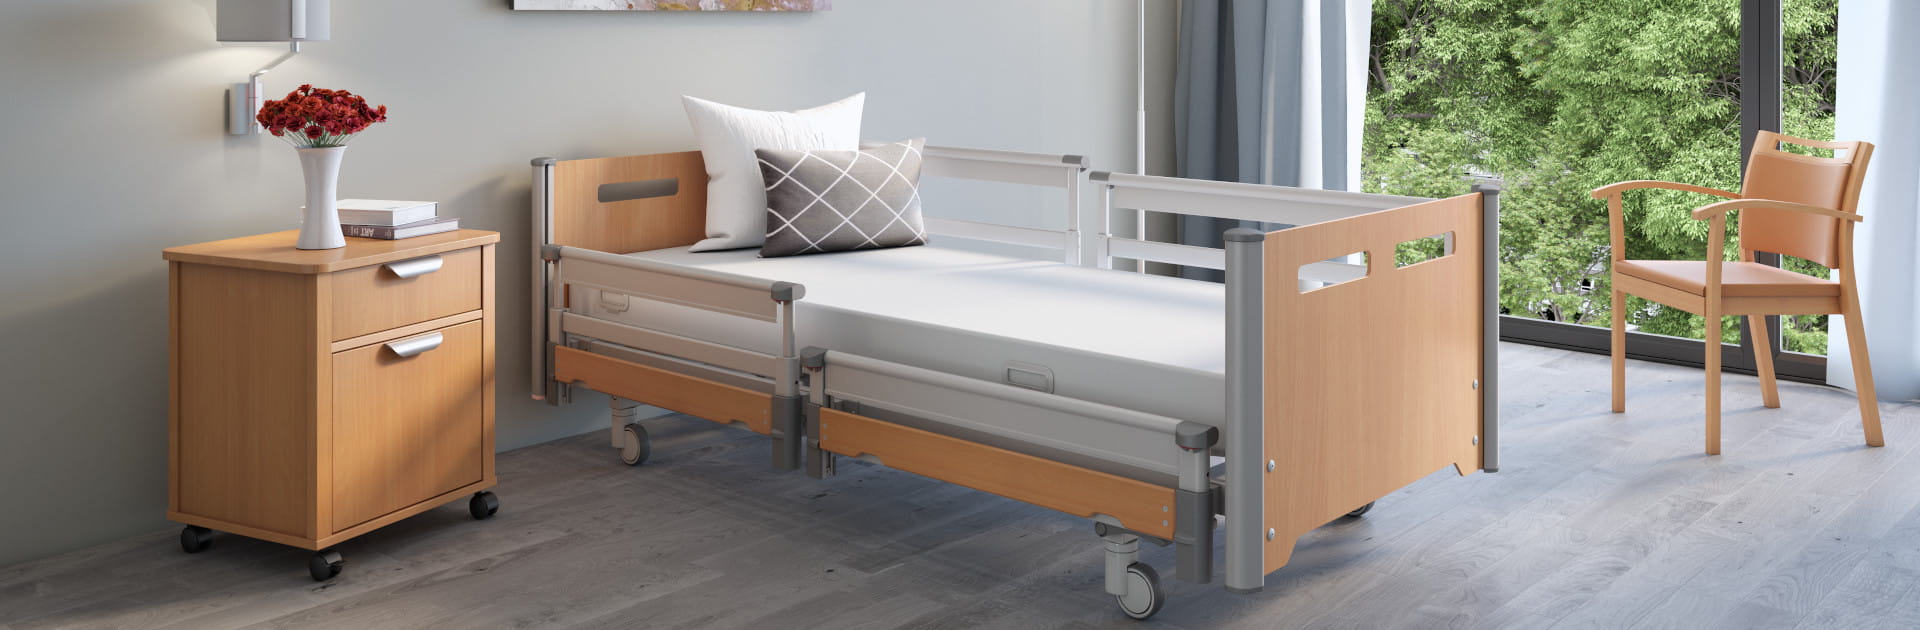 The washable variana nursing bed combines functionally flexible elements with economy and design.